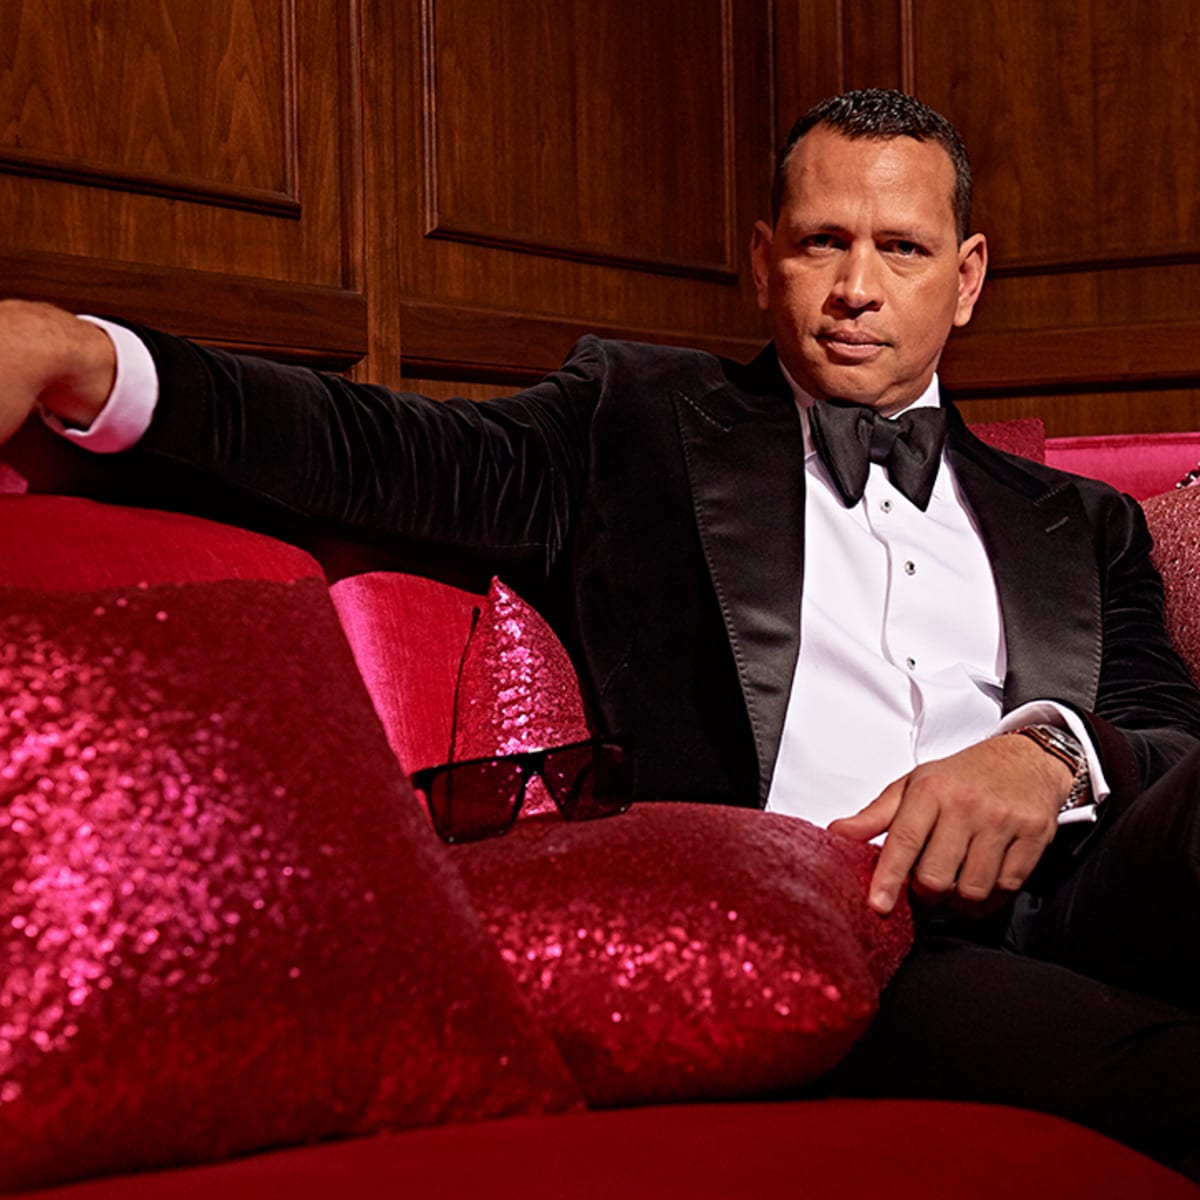 The money advice A-Rod, Alex Rodriguez, would give his younger self